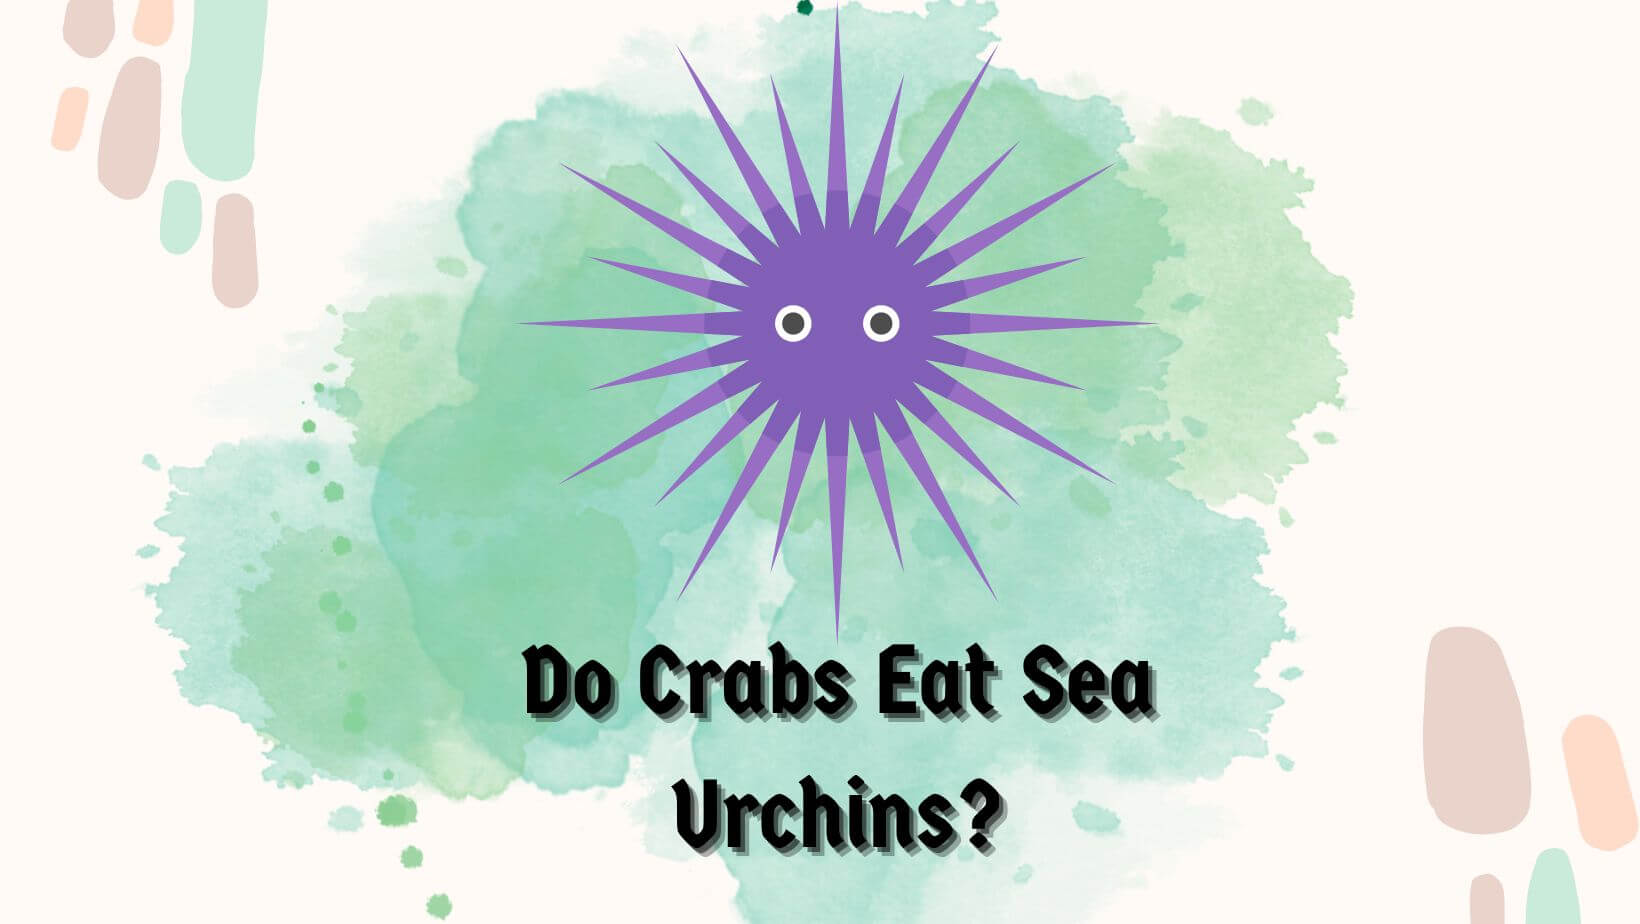 Do Crabs Eat Sea Urchins?